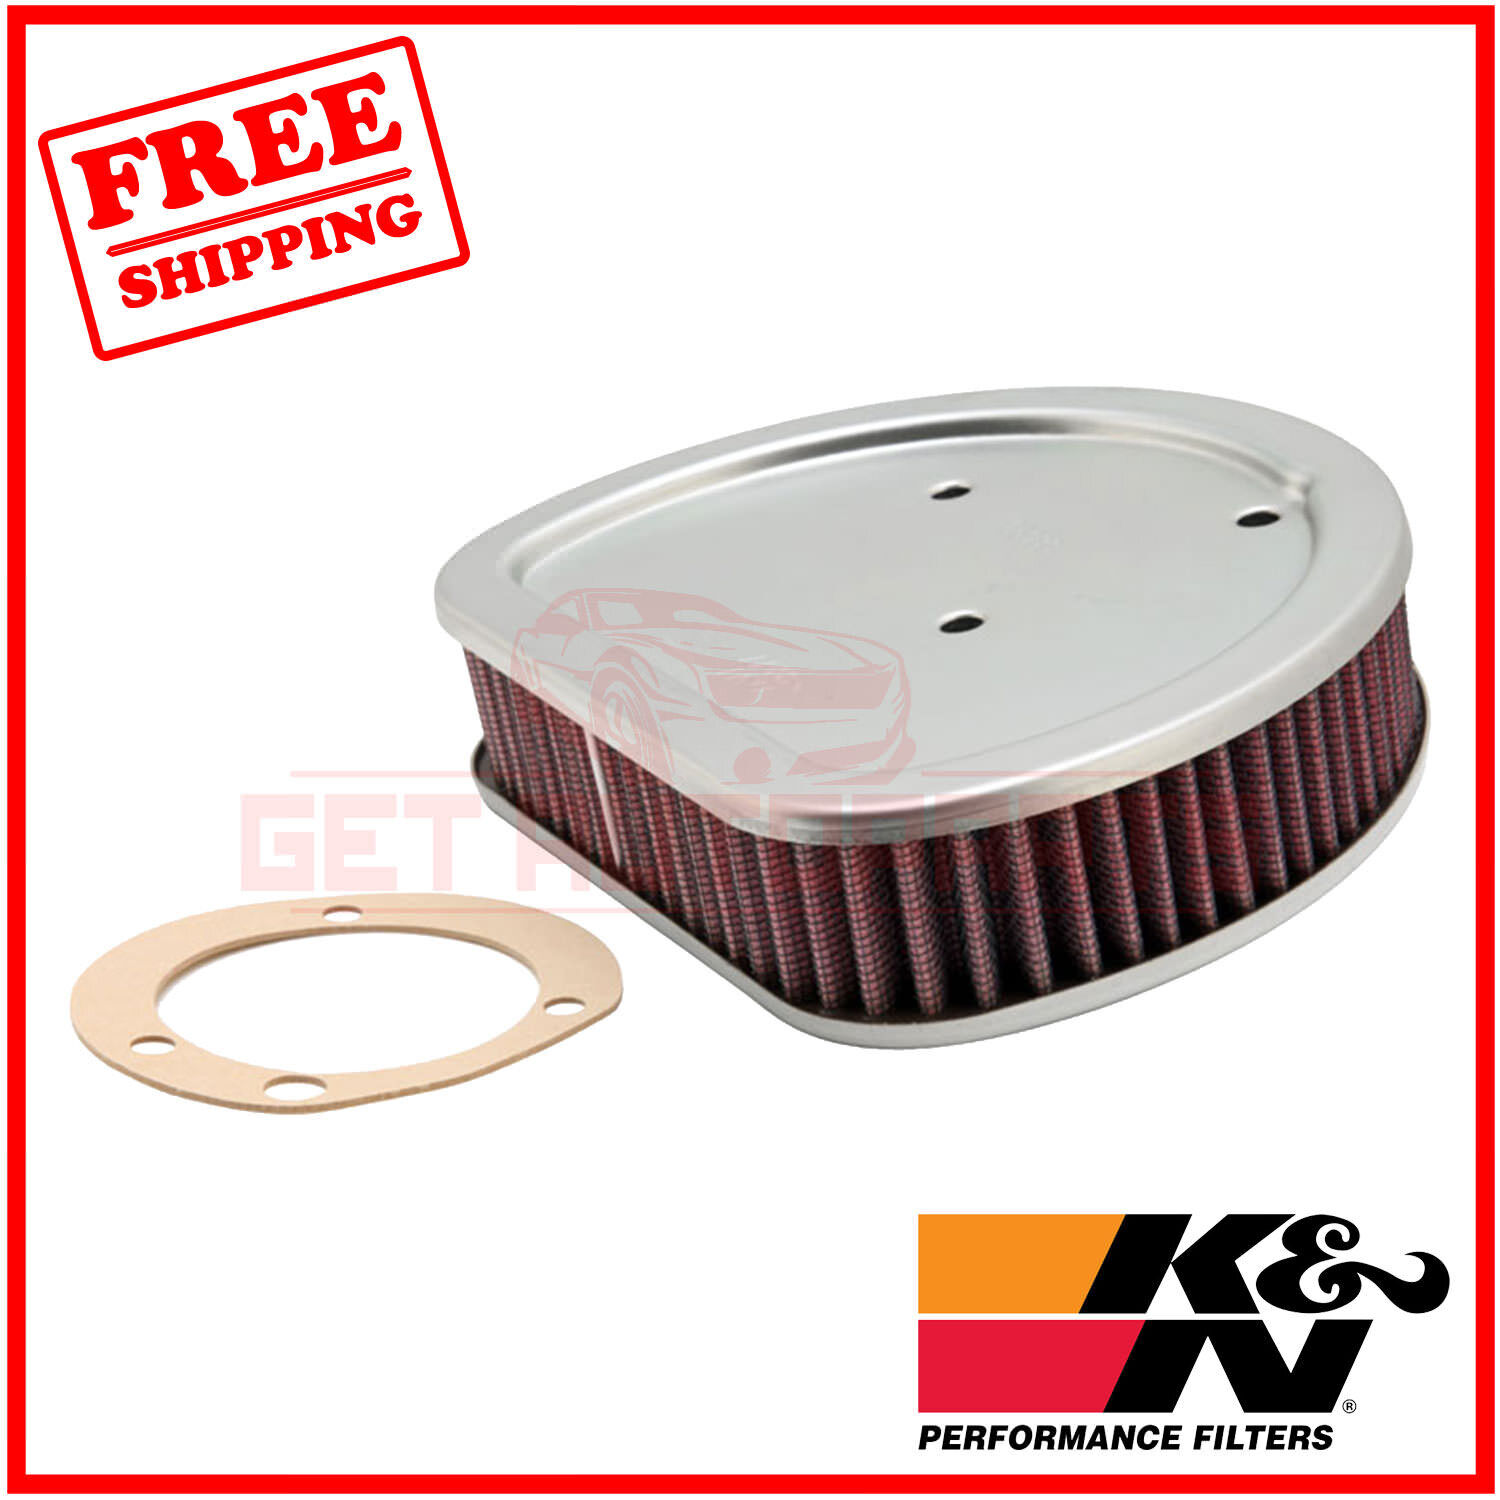 K&N Replacement Air Filter for Harley Davidson FXDL Dyna Low Rider 1999-2005